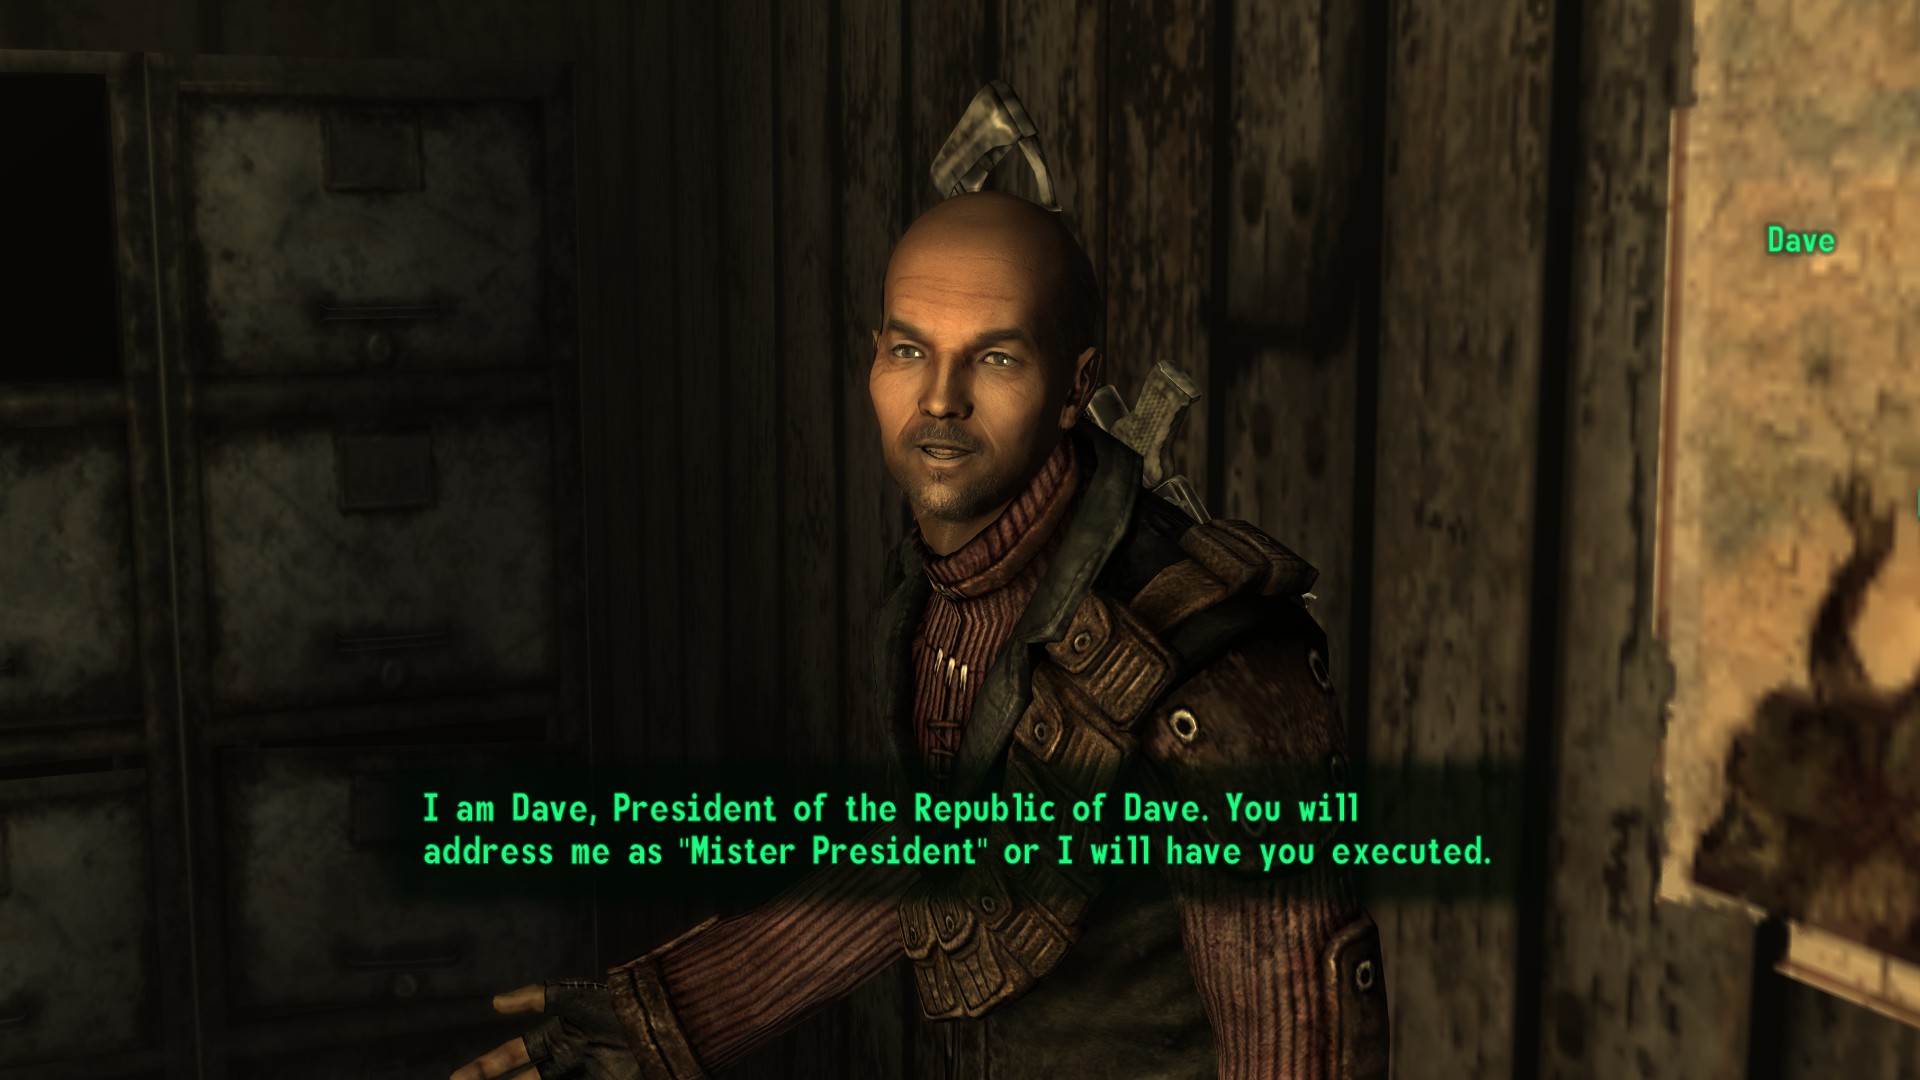 Fallout 3 Isn’t Really An RPG